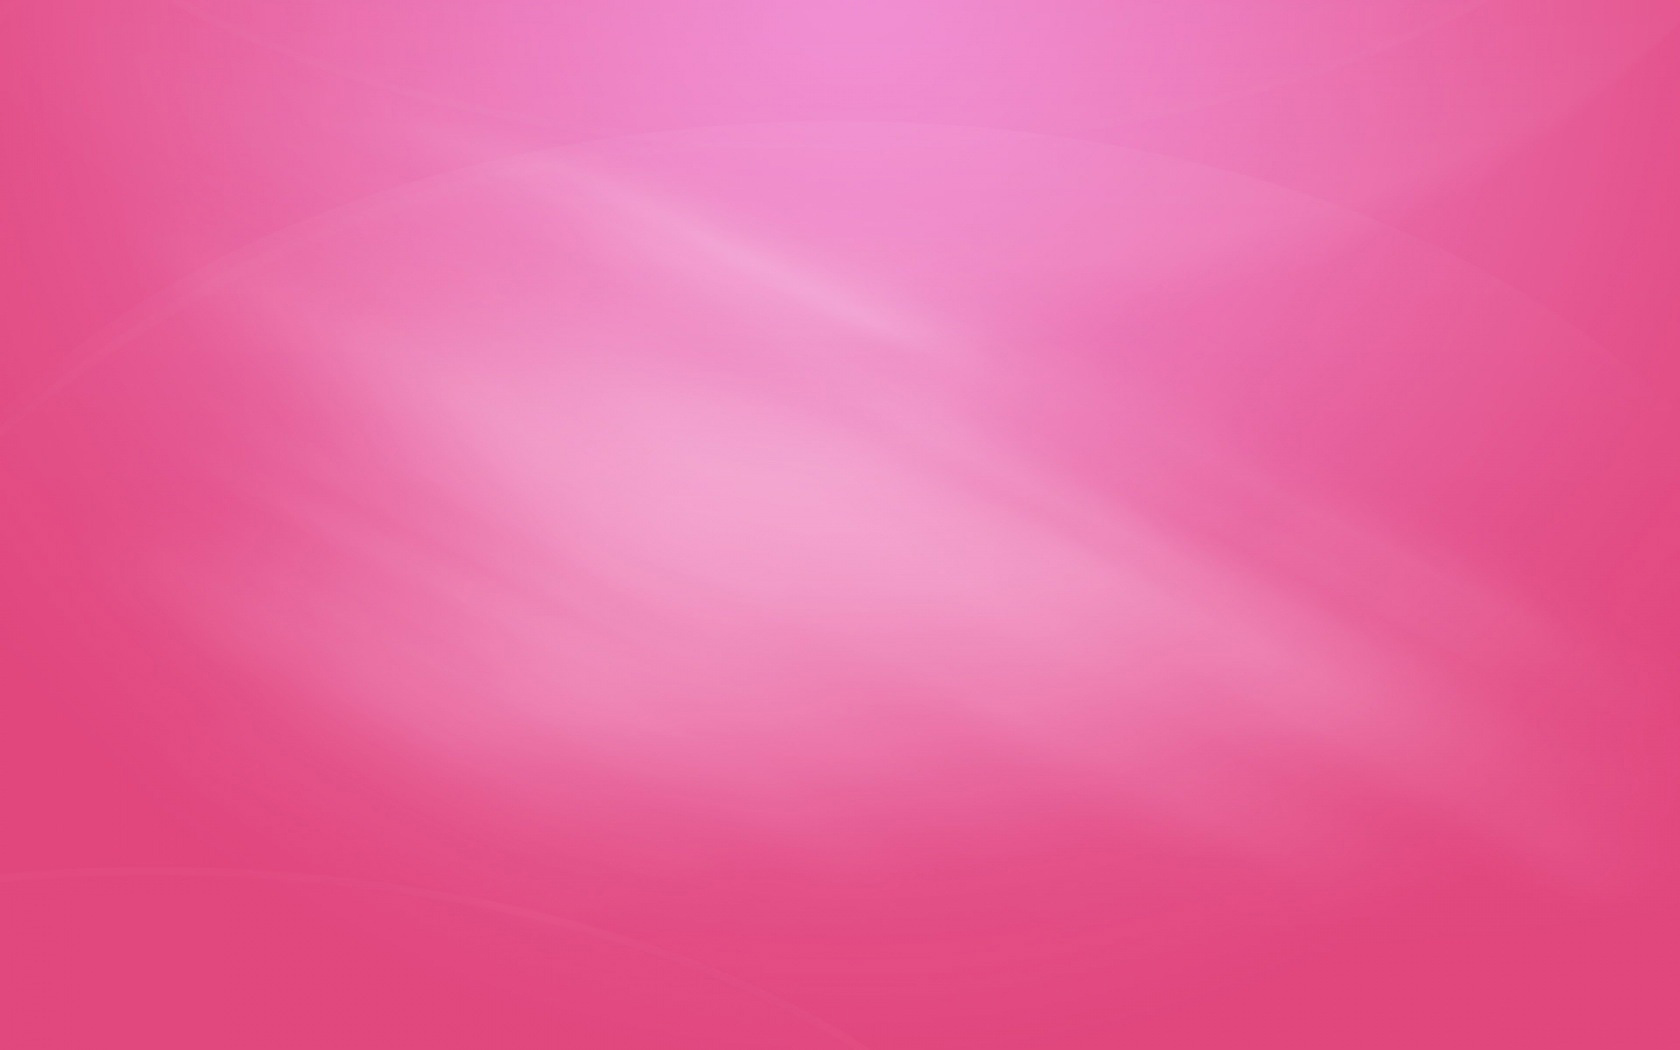 Windows Image Pink Puter Background HD Wallpaper And